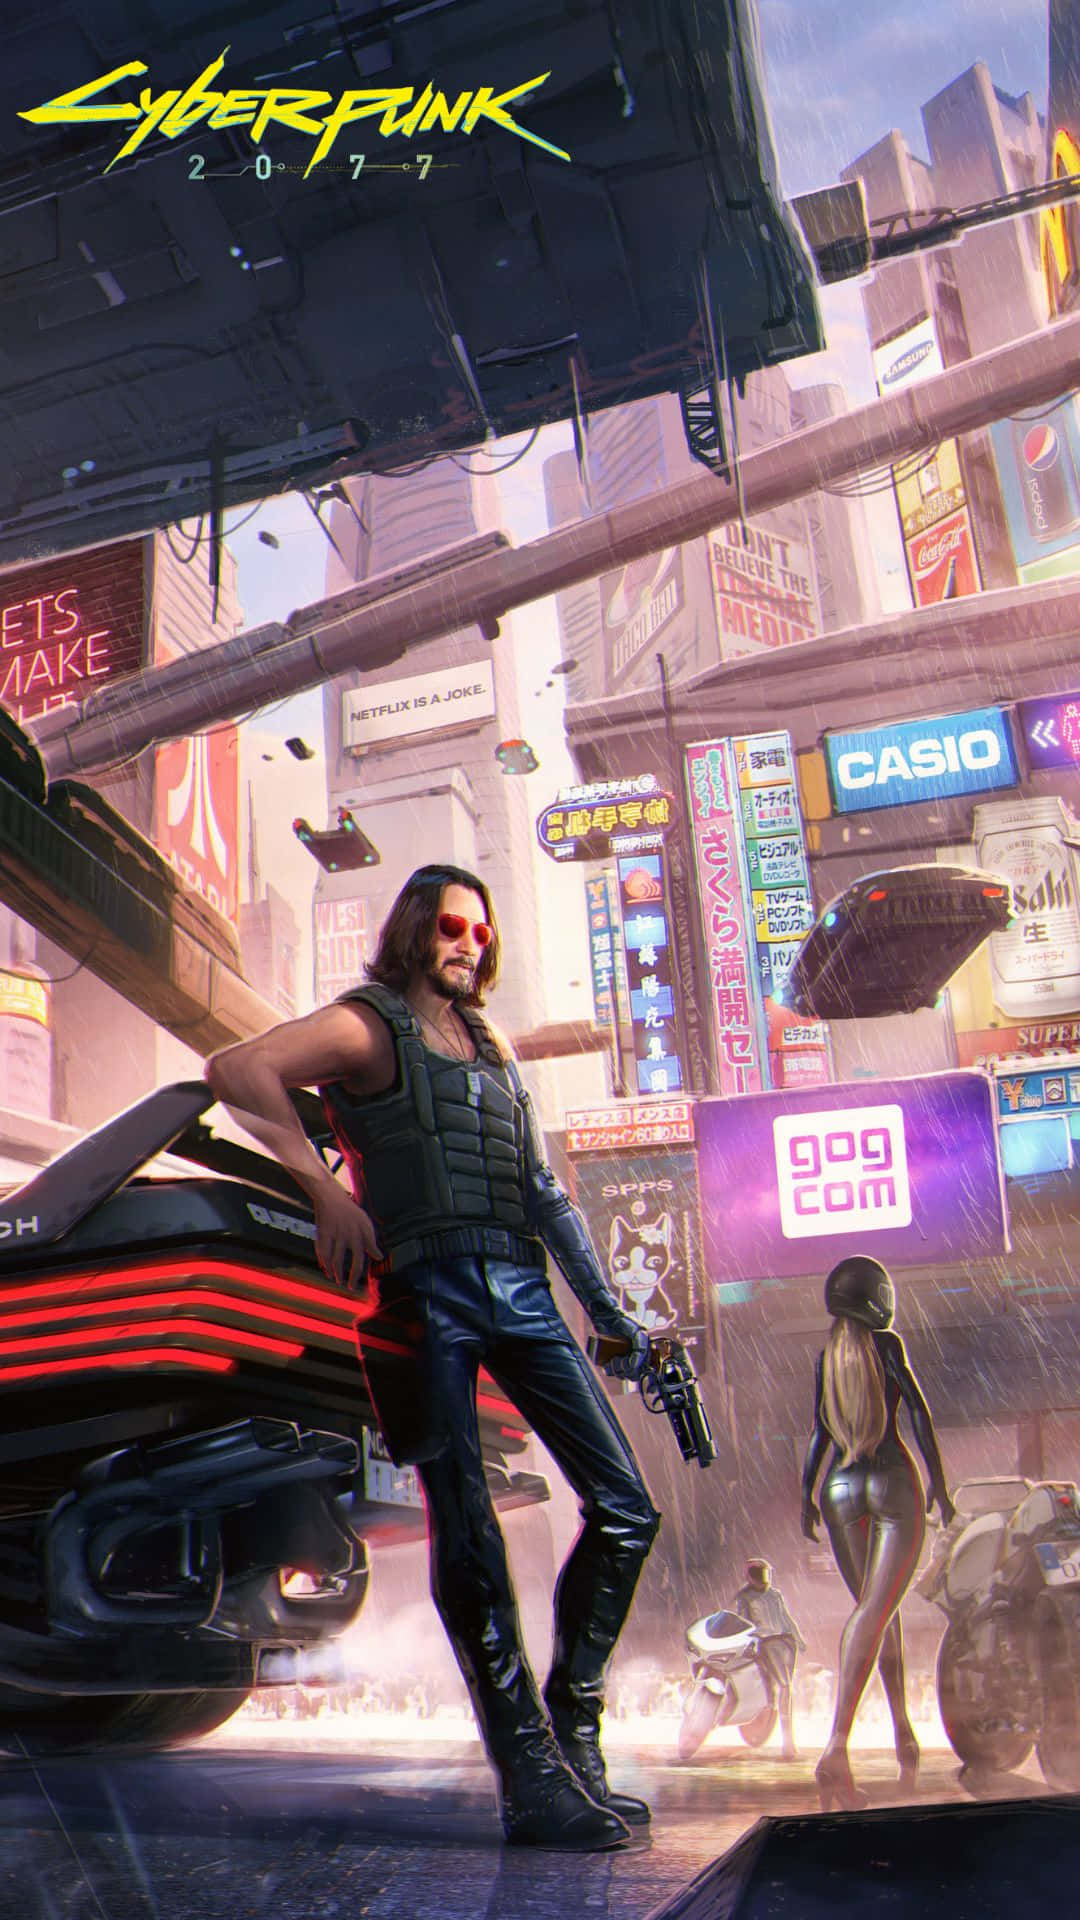 Android Cyberpunk 2077 Background Johnny Silverhand Posted Up Beside A Car